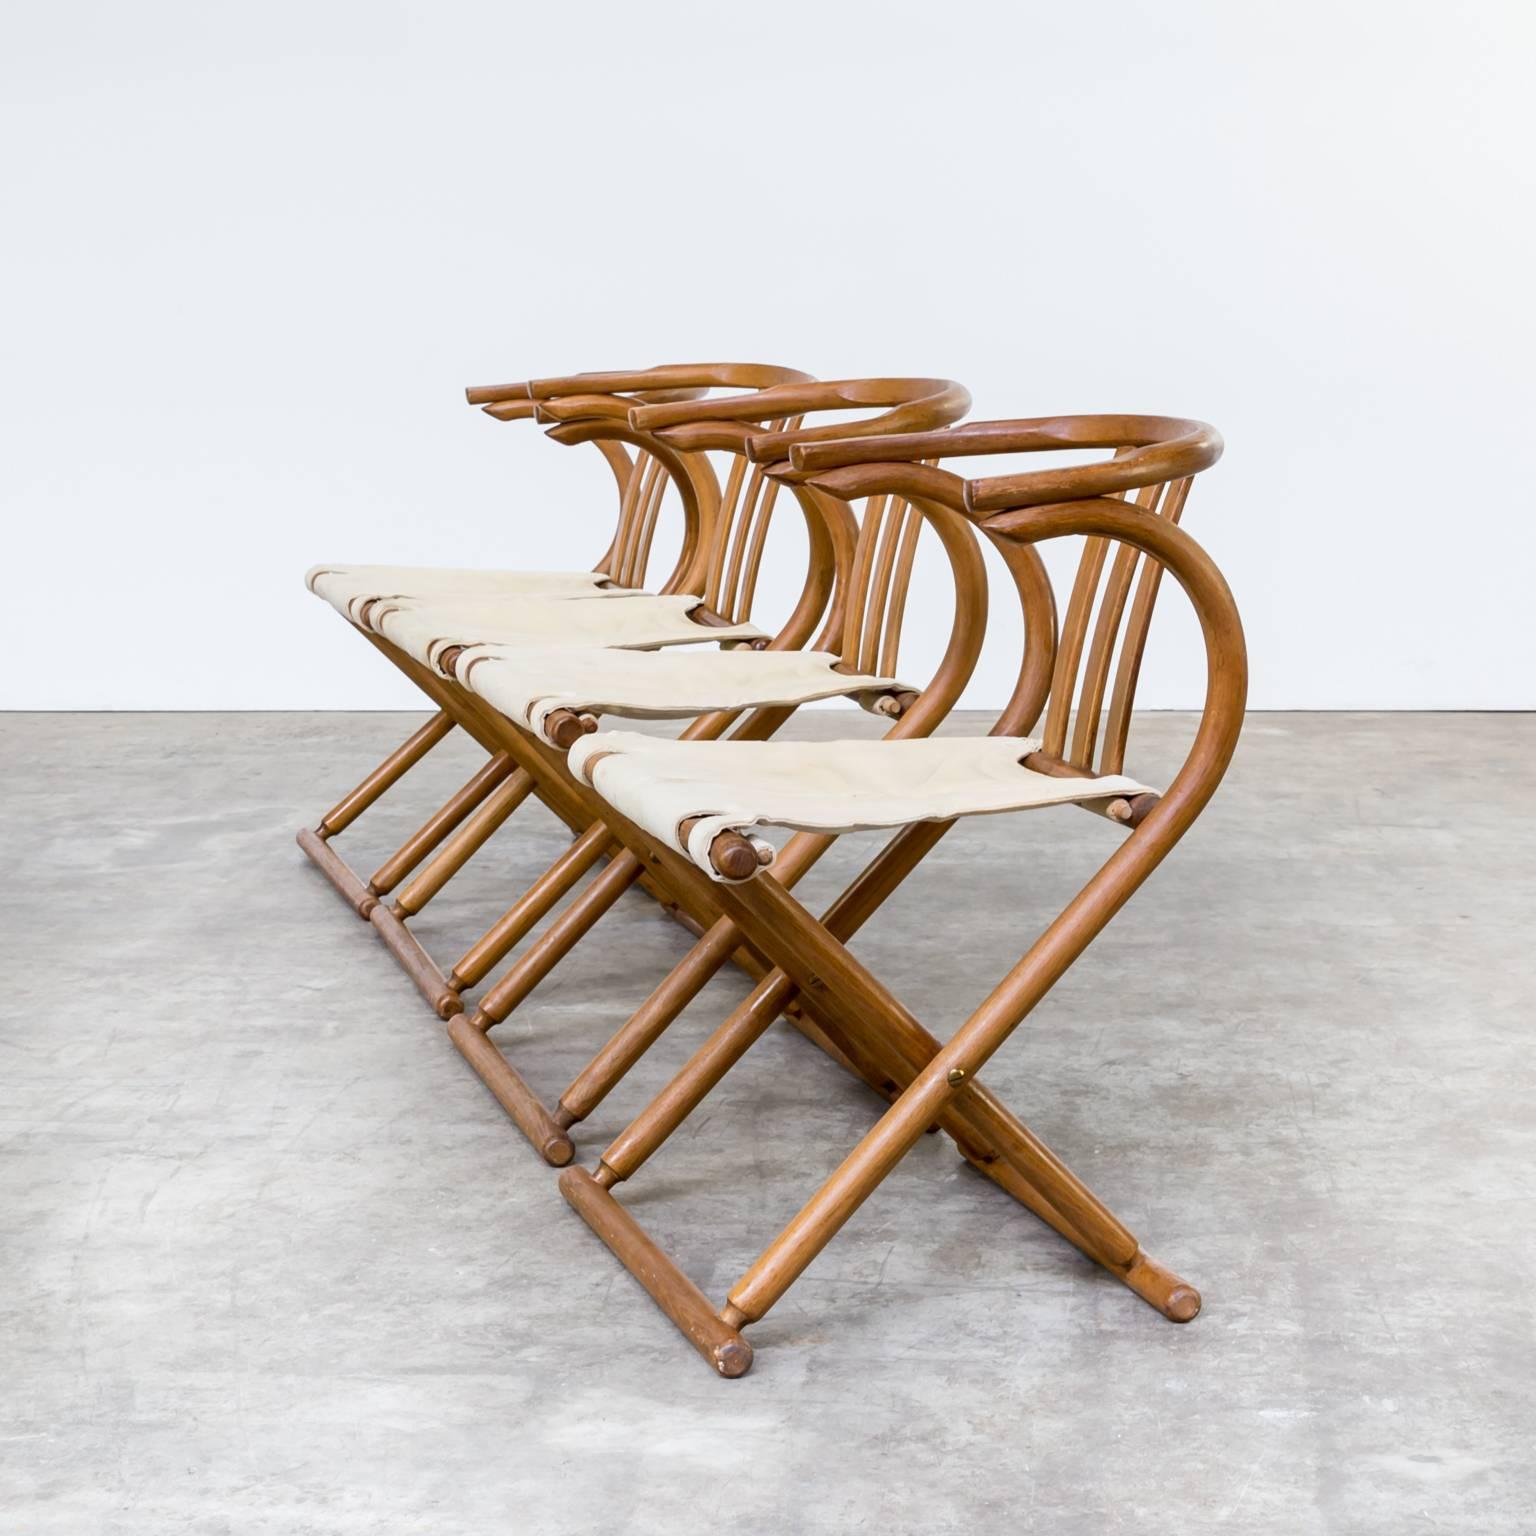 One set of four Thonet bentwood folding chairs. The chairs are in good condition, wear consistent with age and use. Frames very good. Thonet is known as specialist in bentwood furniture. These folding chairs are comfortable and with beautiful lined